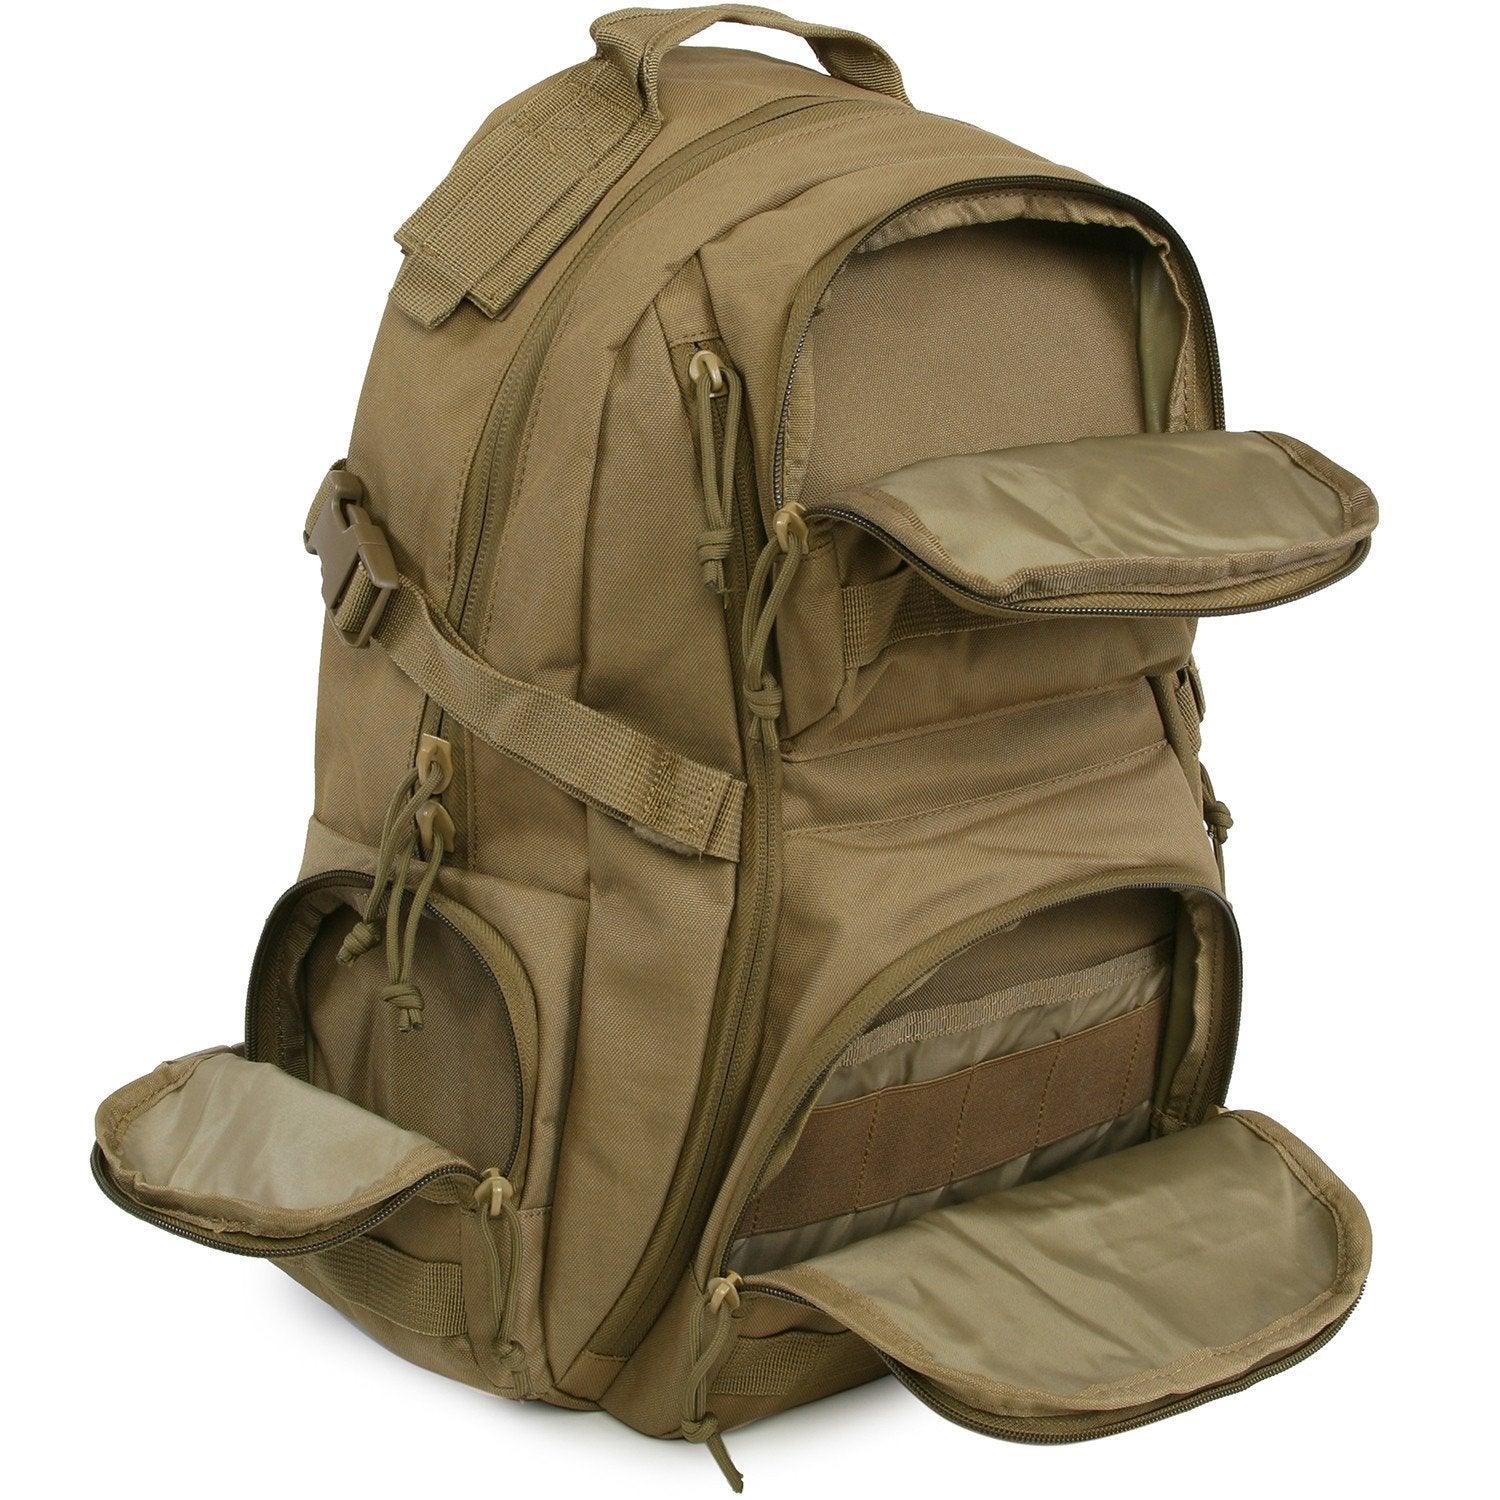 Crusher 2 Day Backpack | Durable Tactical Pack | Police & Outdoor